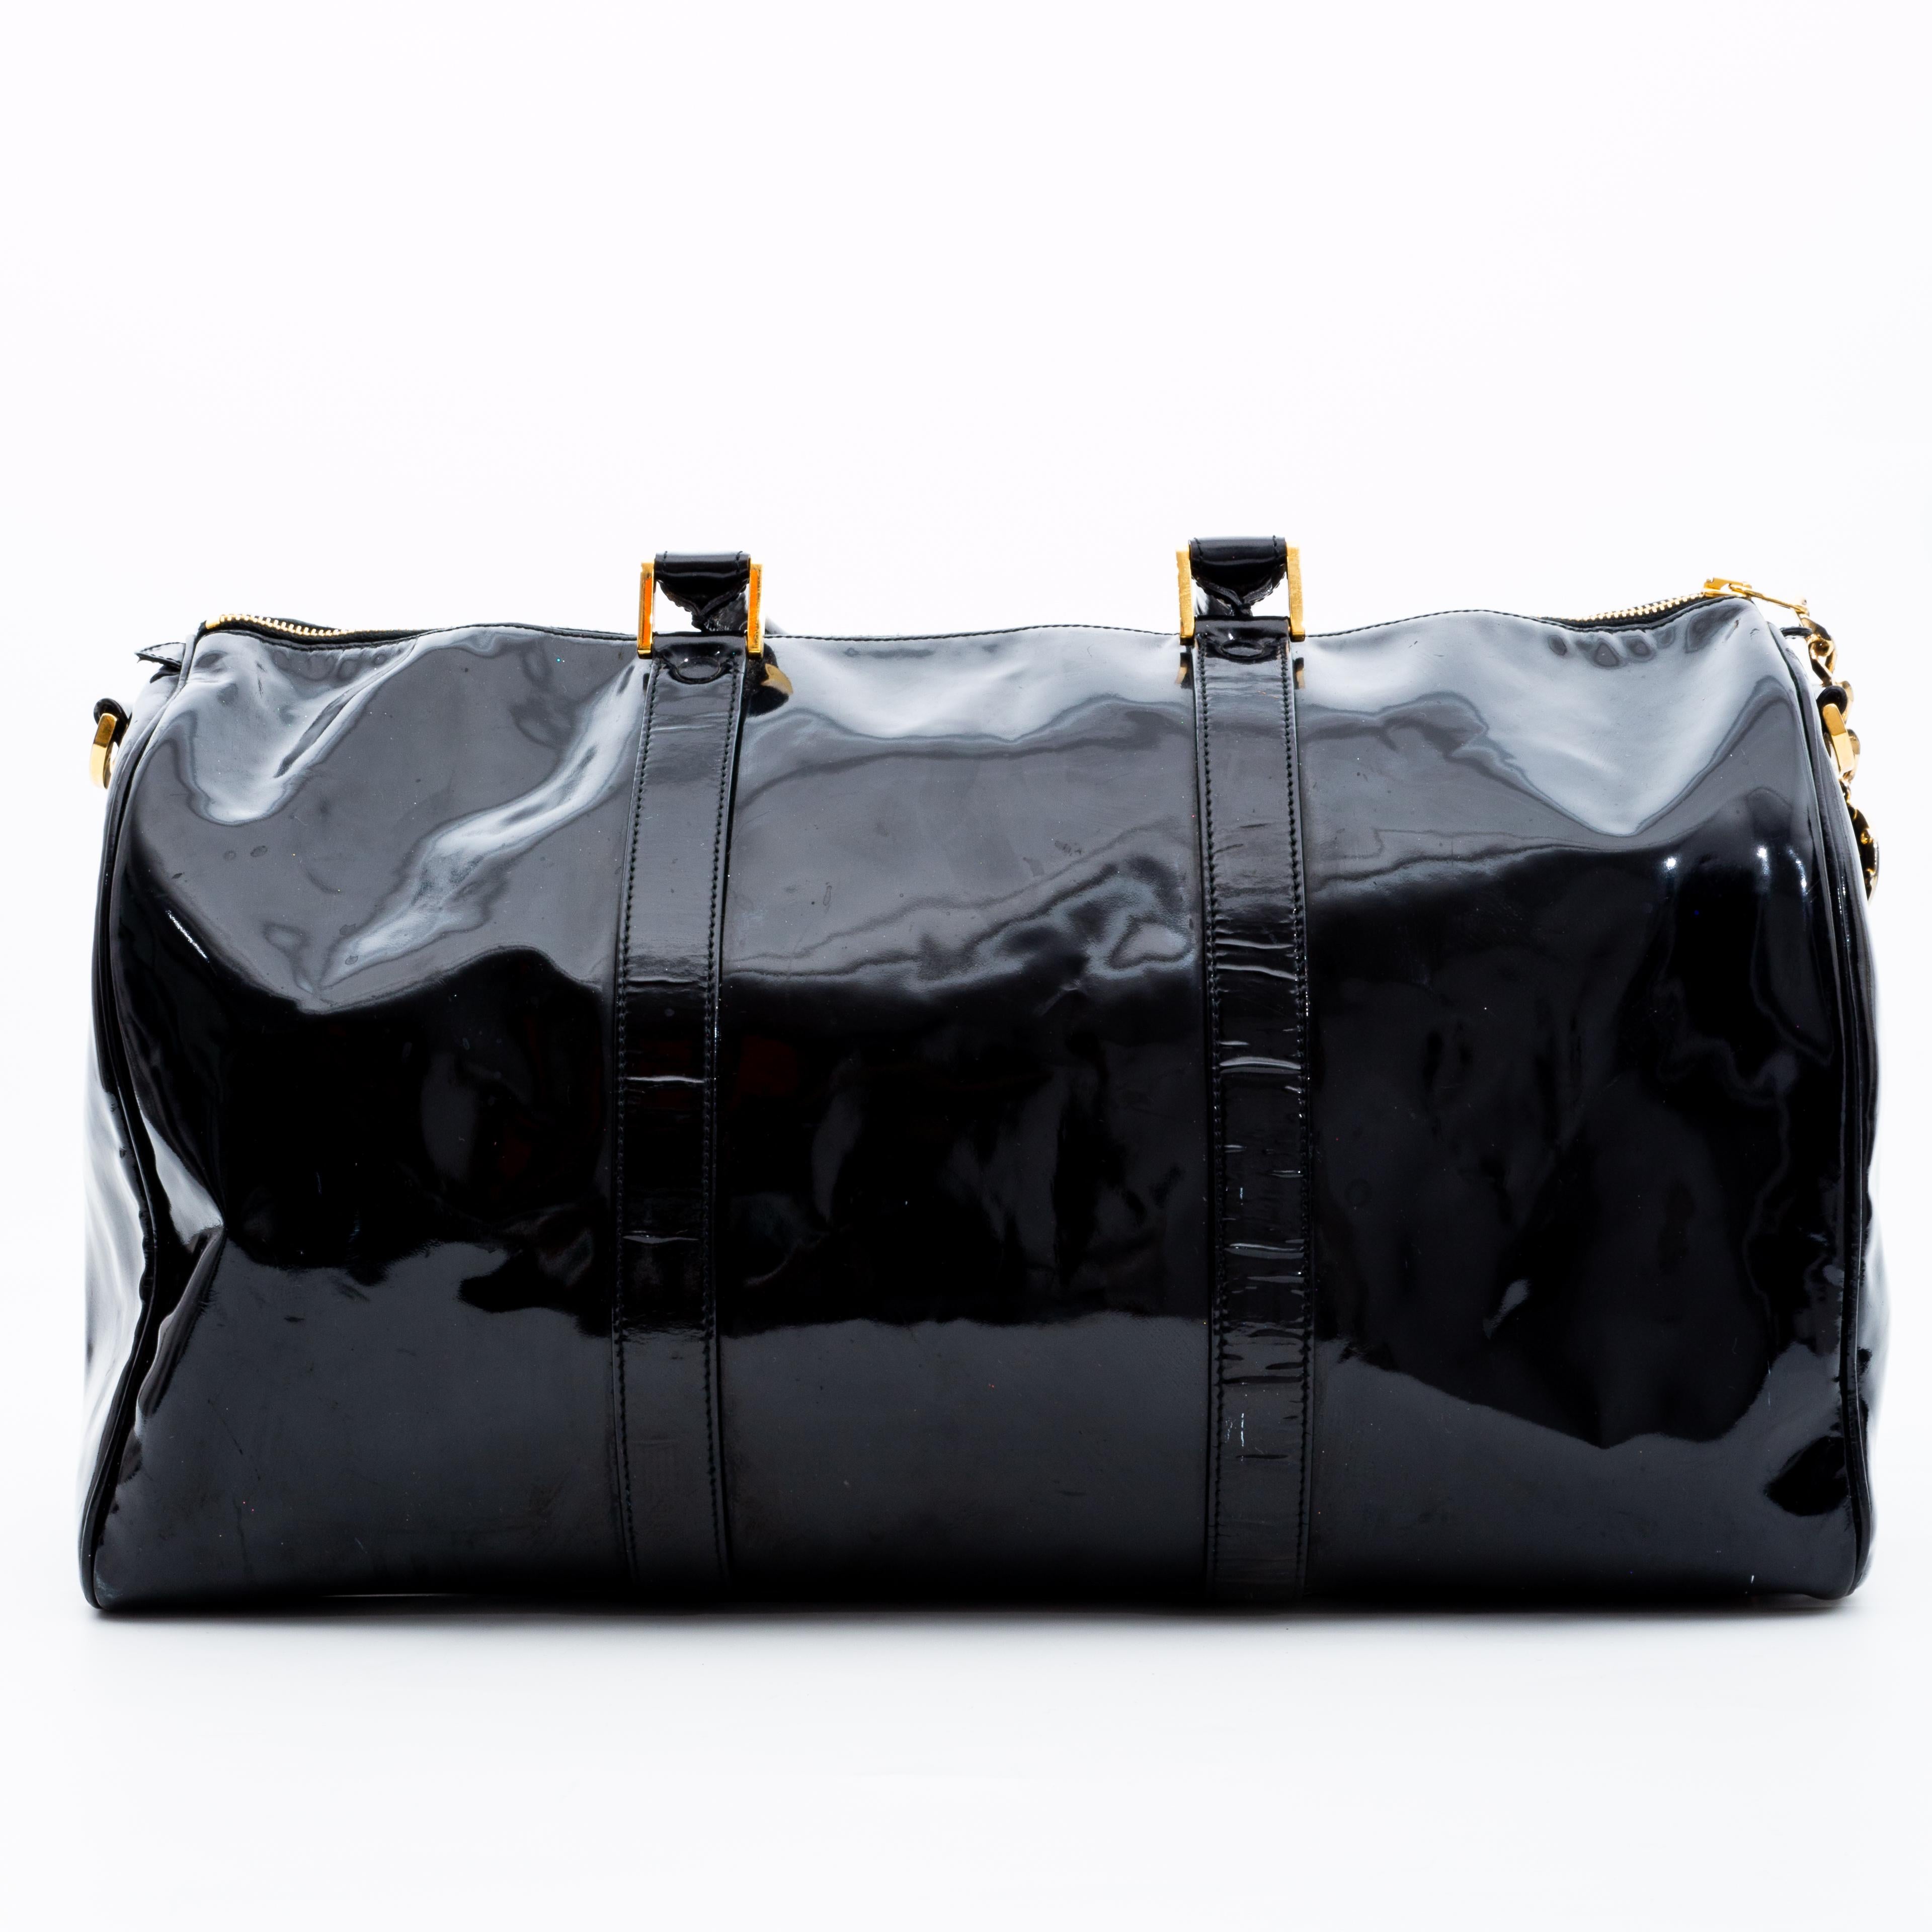 A classic Bowler bag made in the bold and statement black patent leather, this Chanel bag is everything that is highly functional and also extremely stylish. With a gold-tone top zipper closure and a classic bowler shape, this bag provides ample